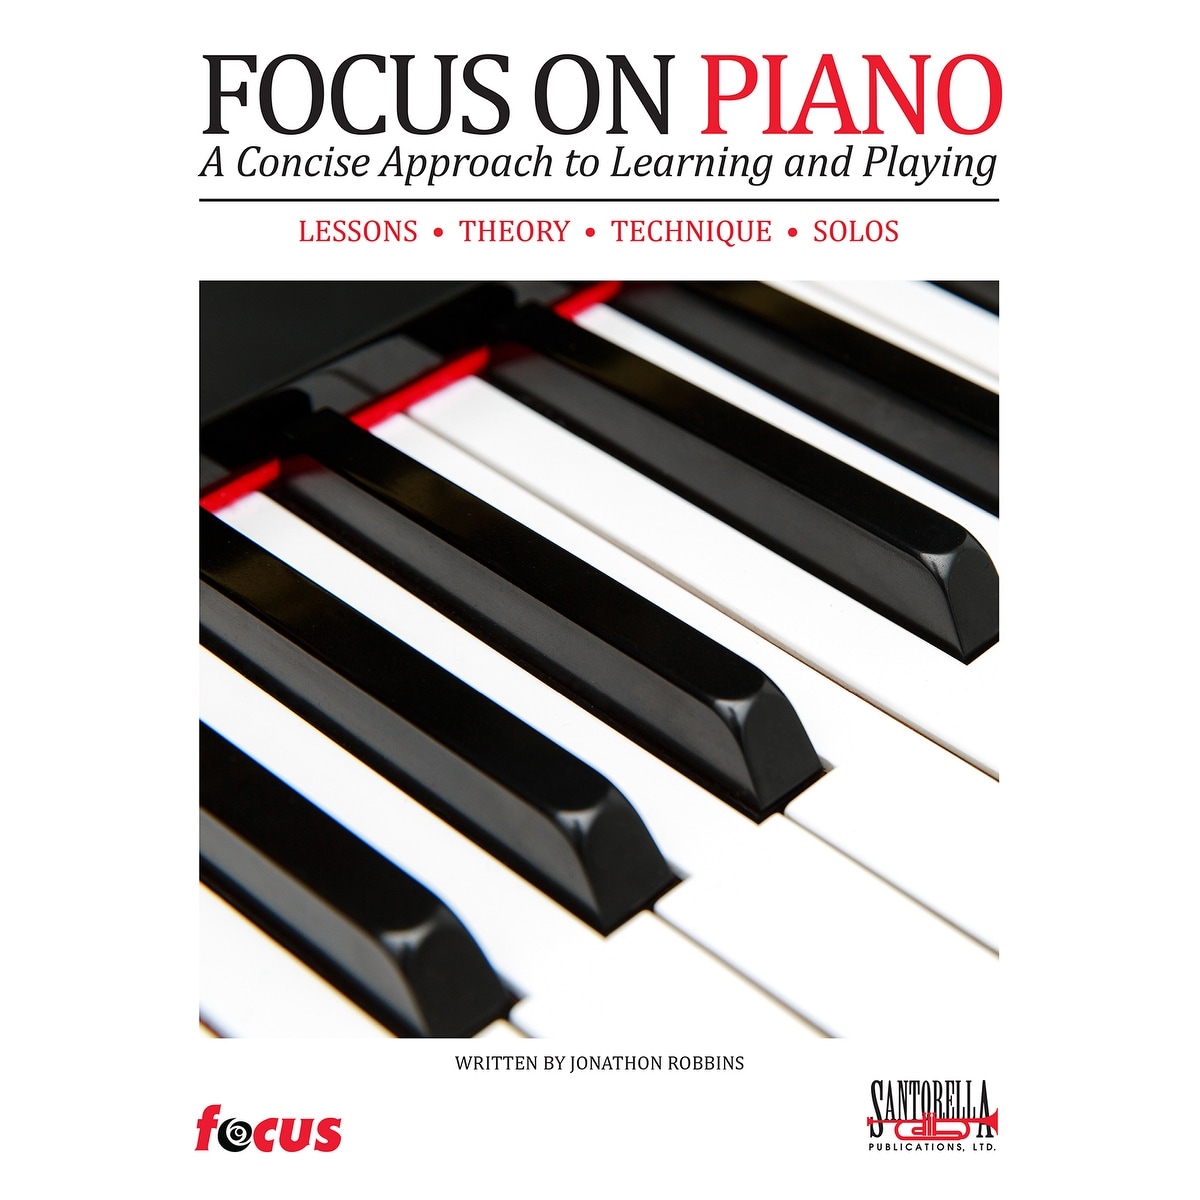 Focus on Piano - A Concise Approach to Learning & Playing (with CD)